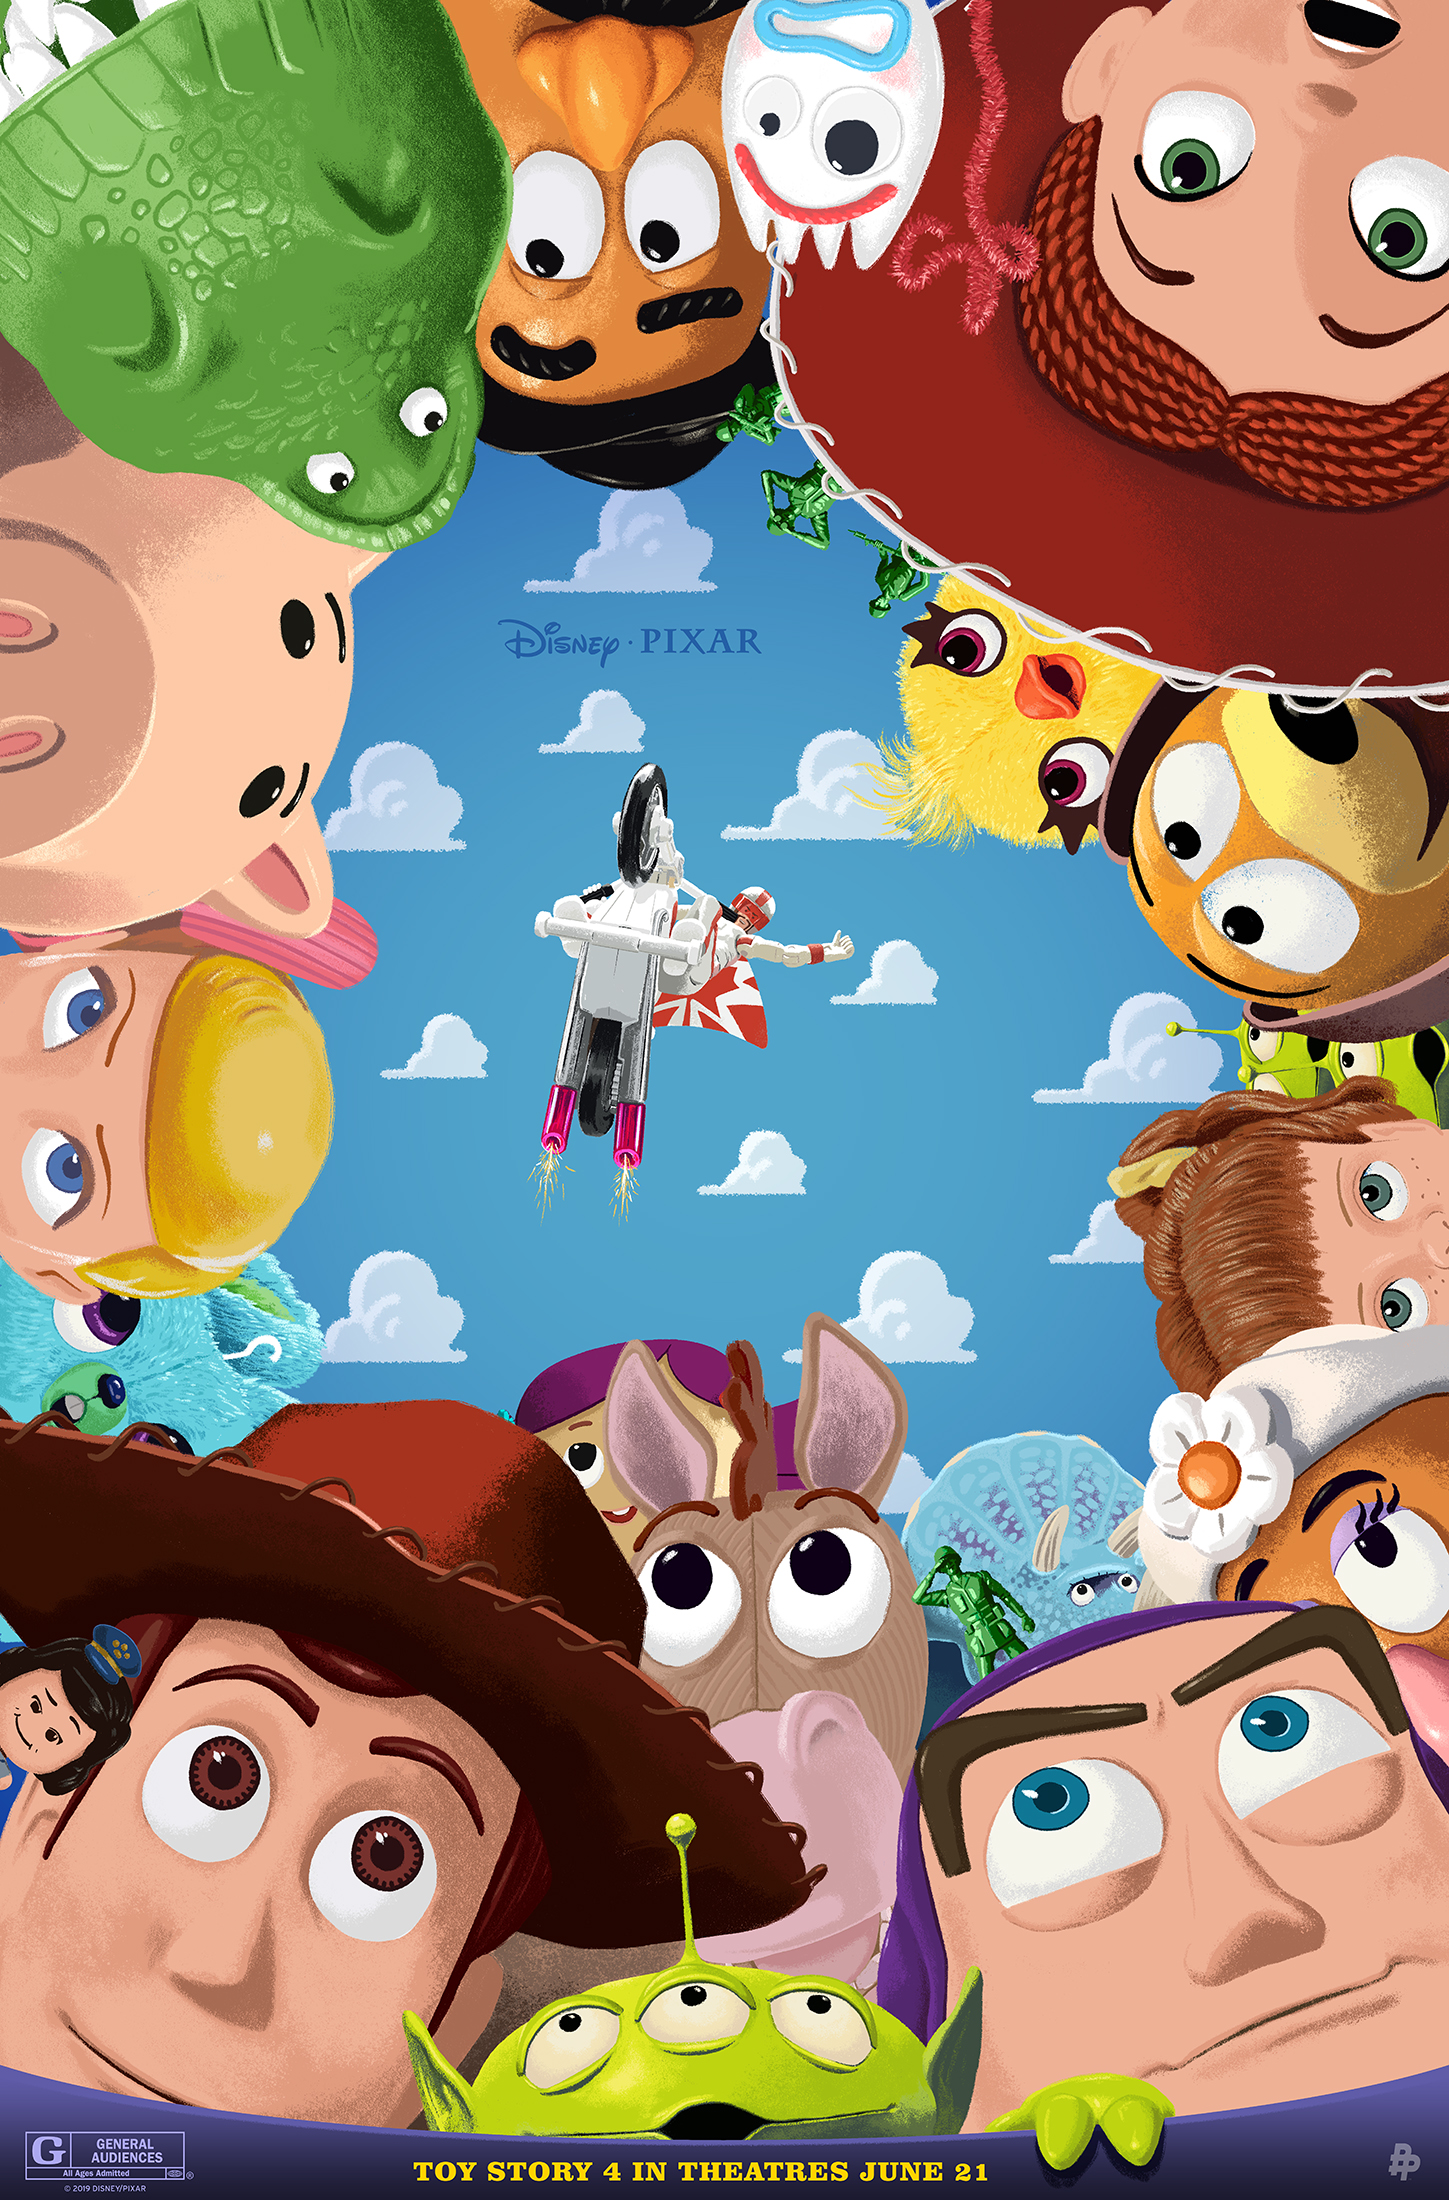 Artwork by Toy Story 4